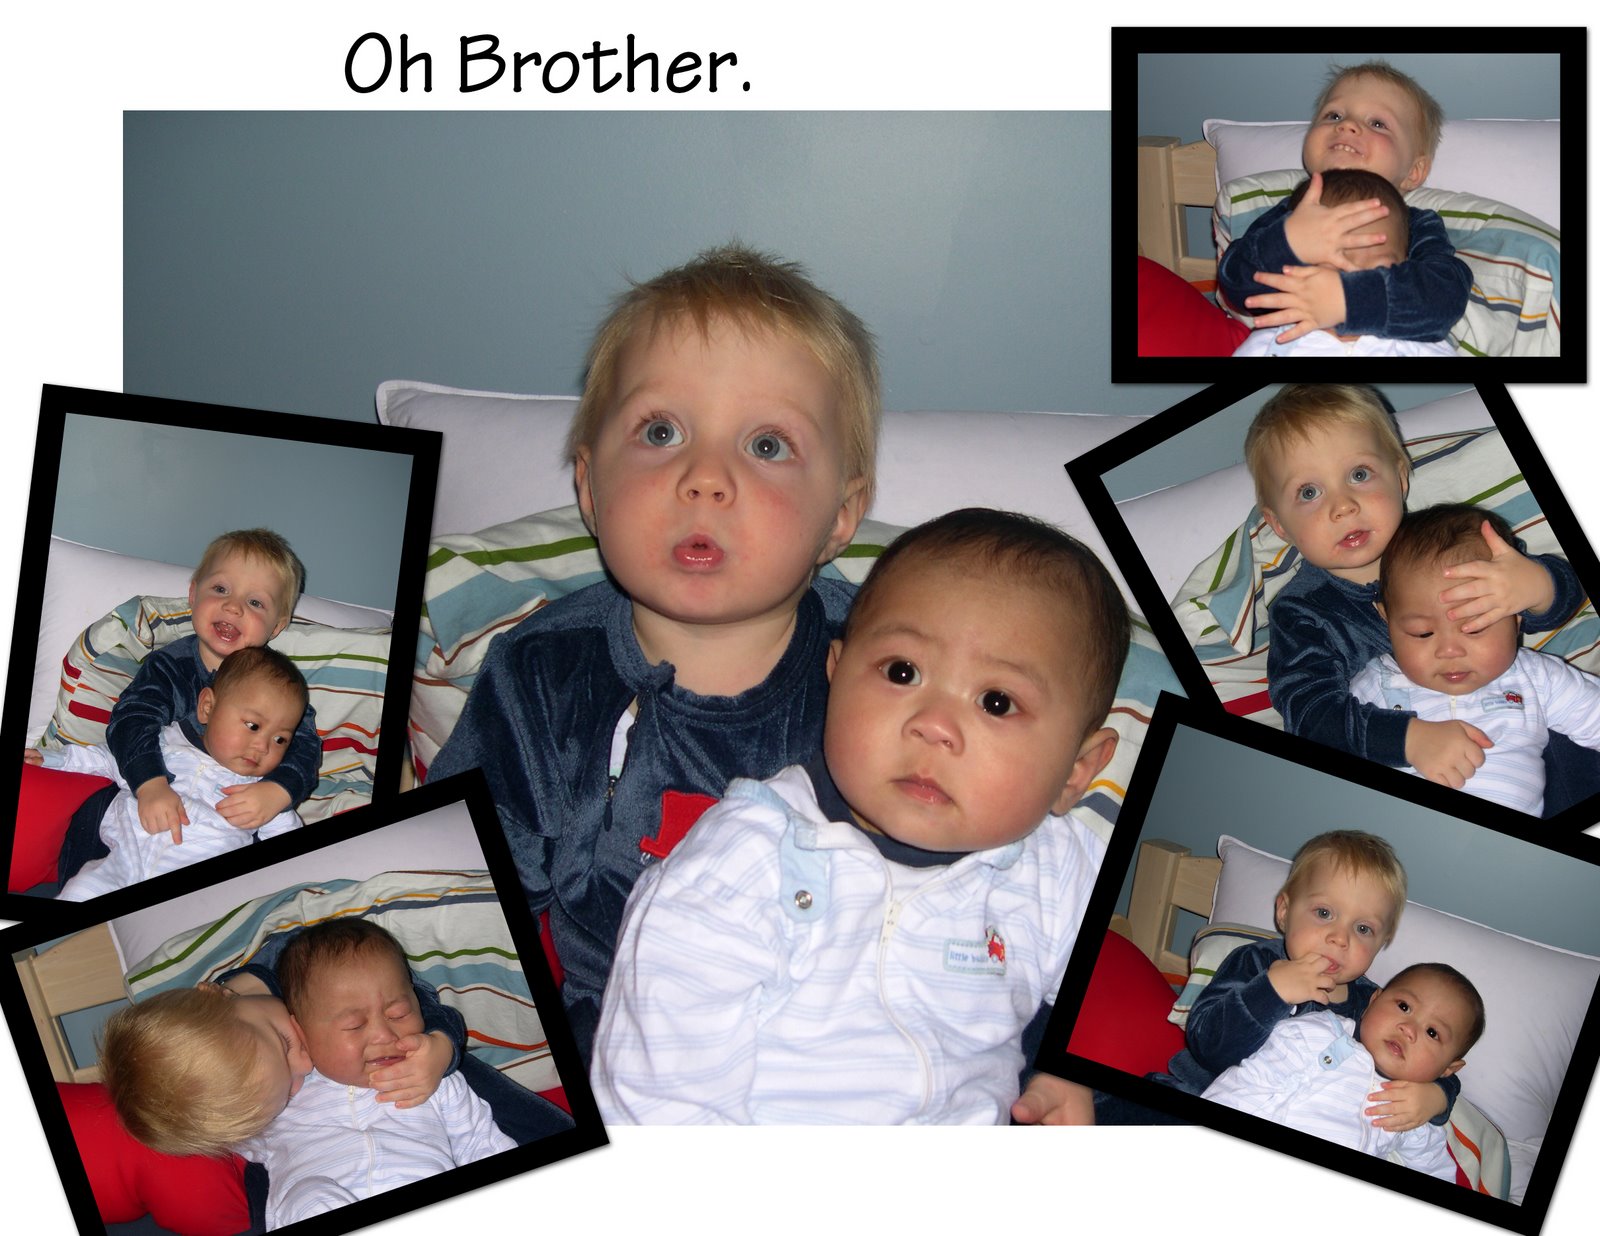 [Oh+Brother.jpg]